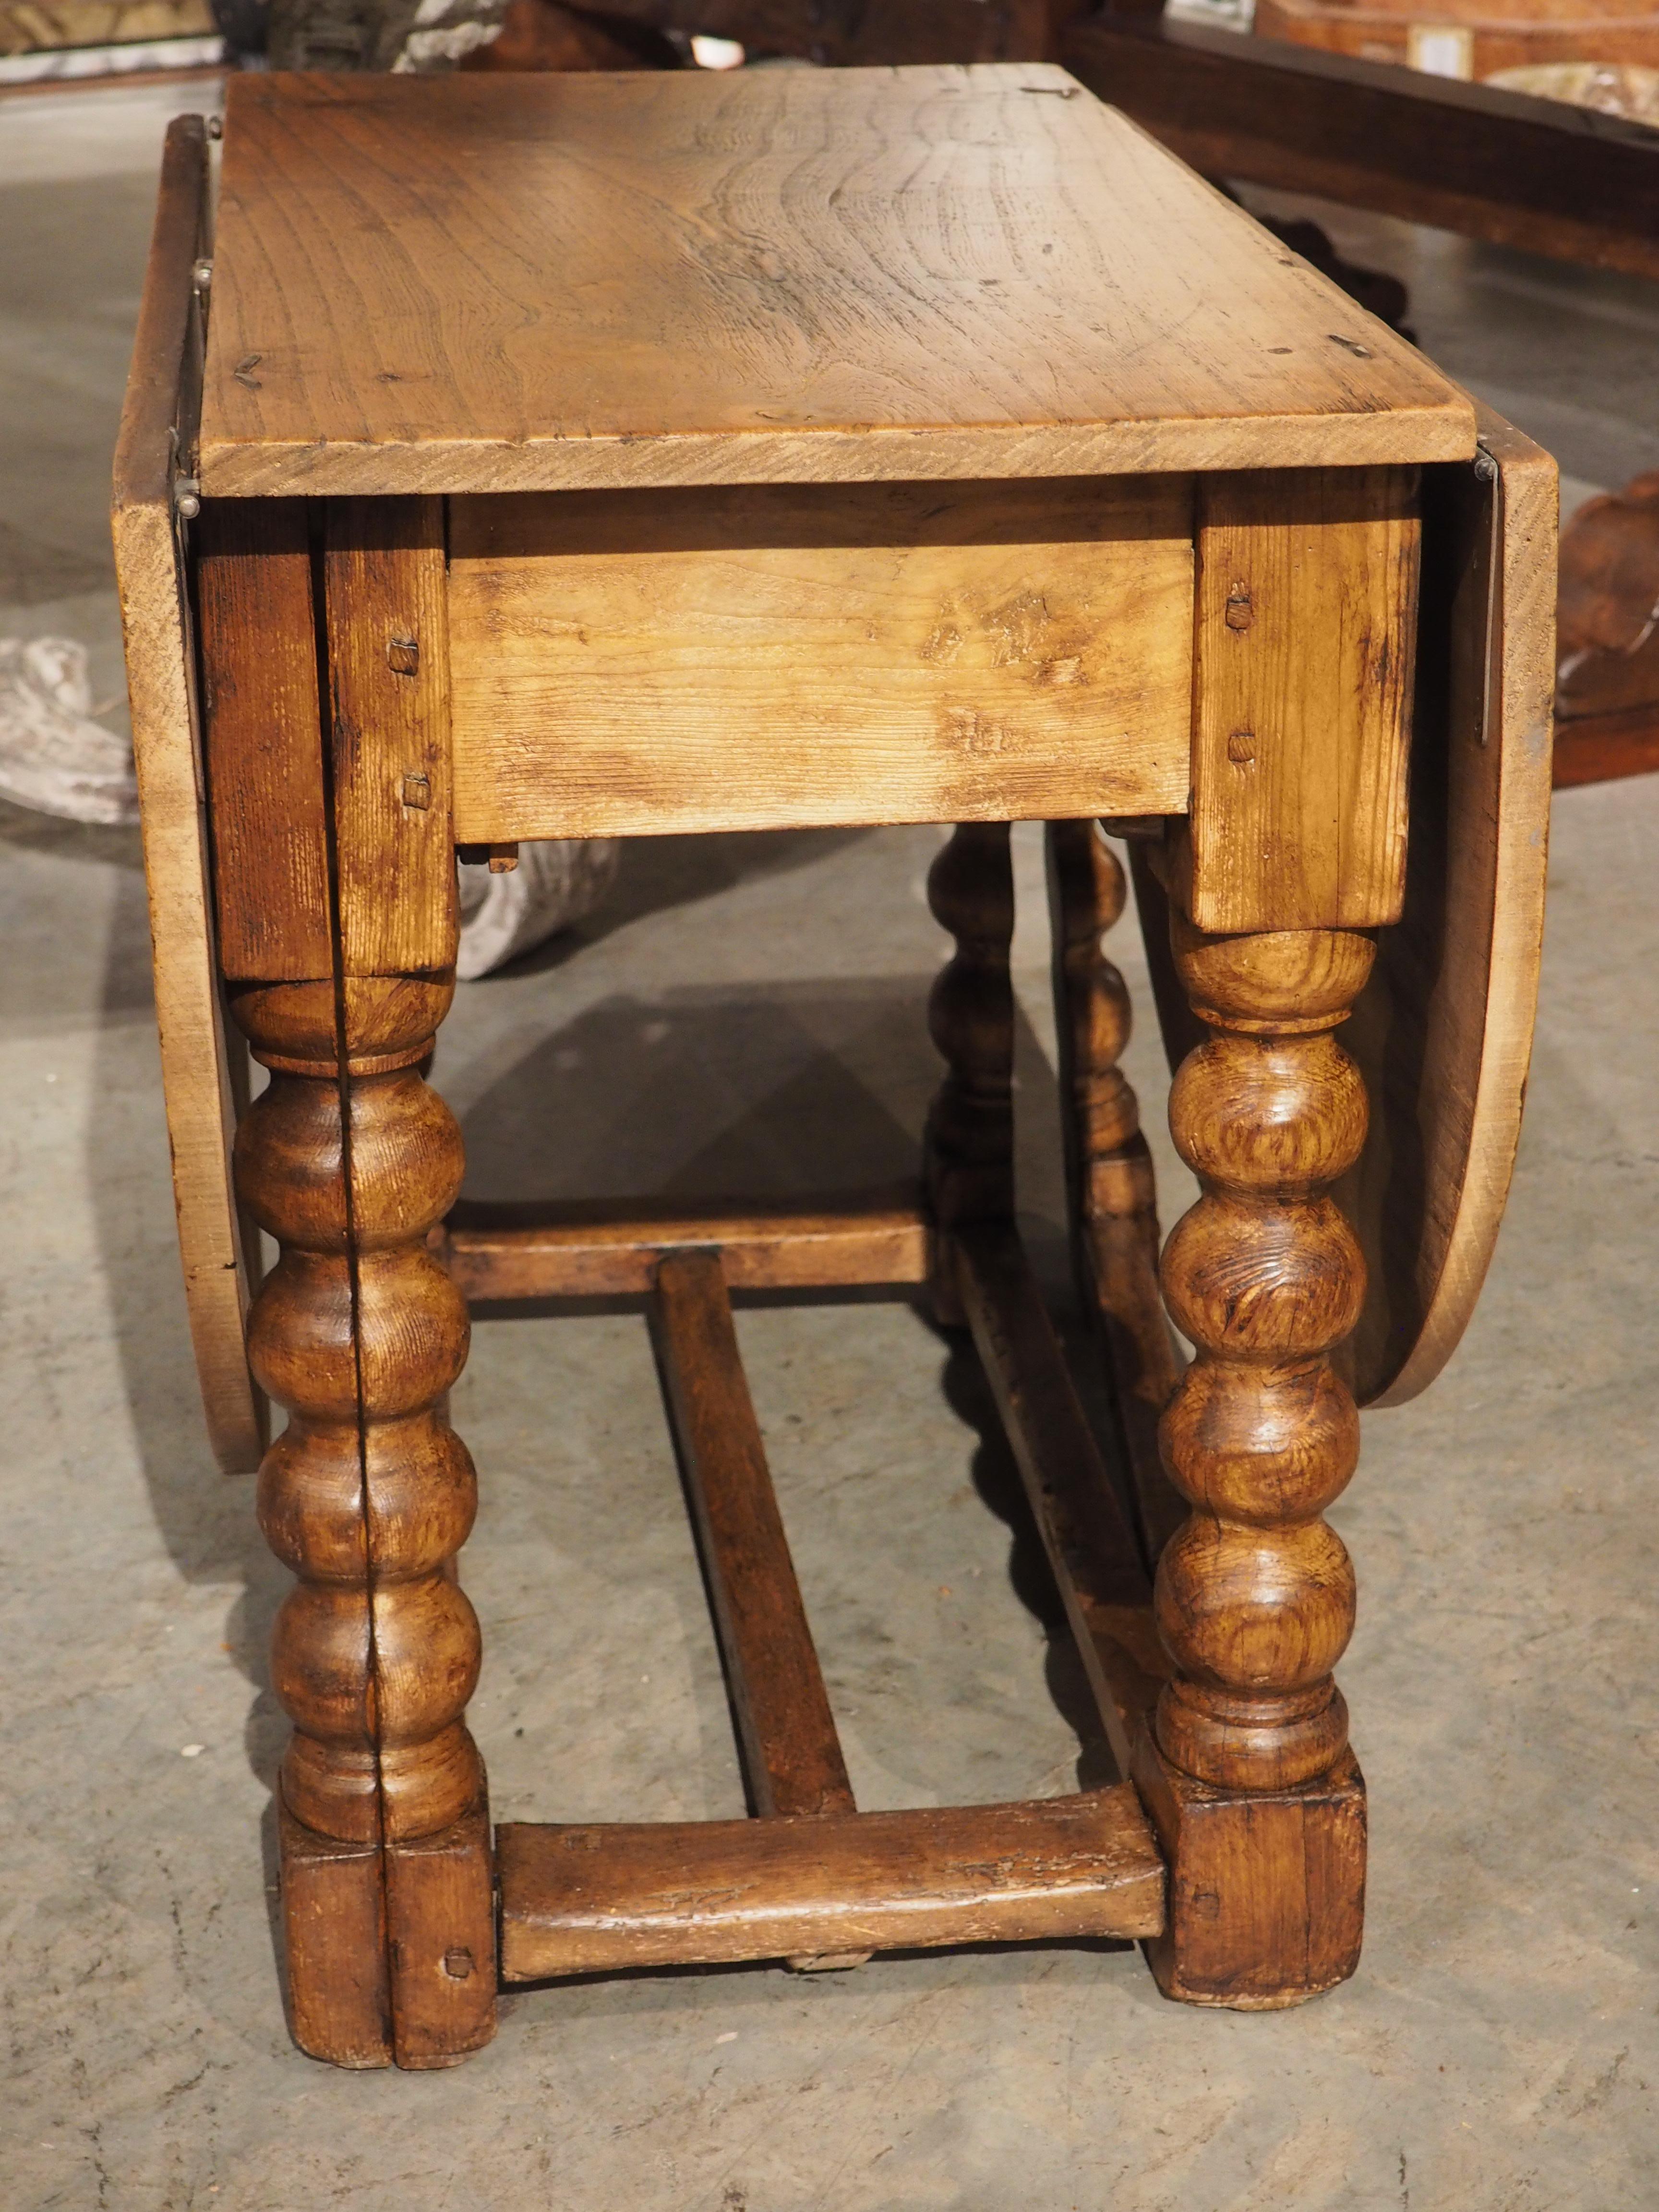 Metal 17th Century Oval Gate Leg Table from England